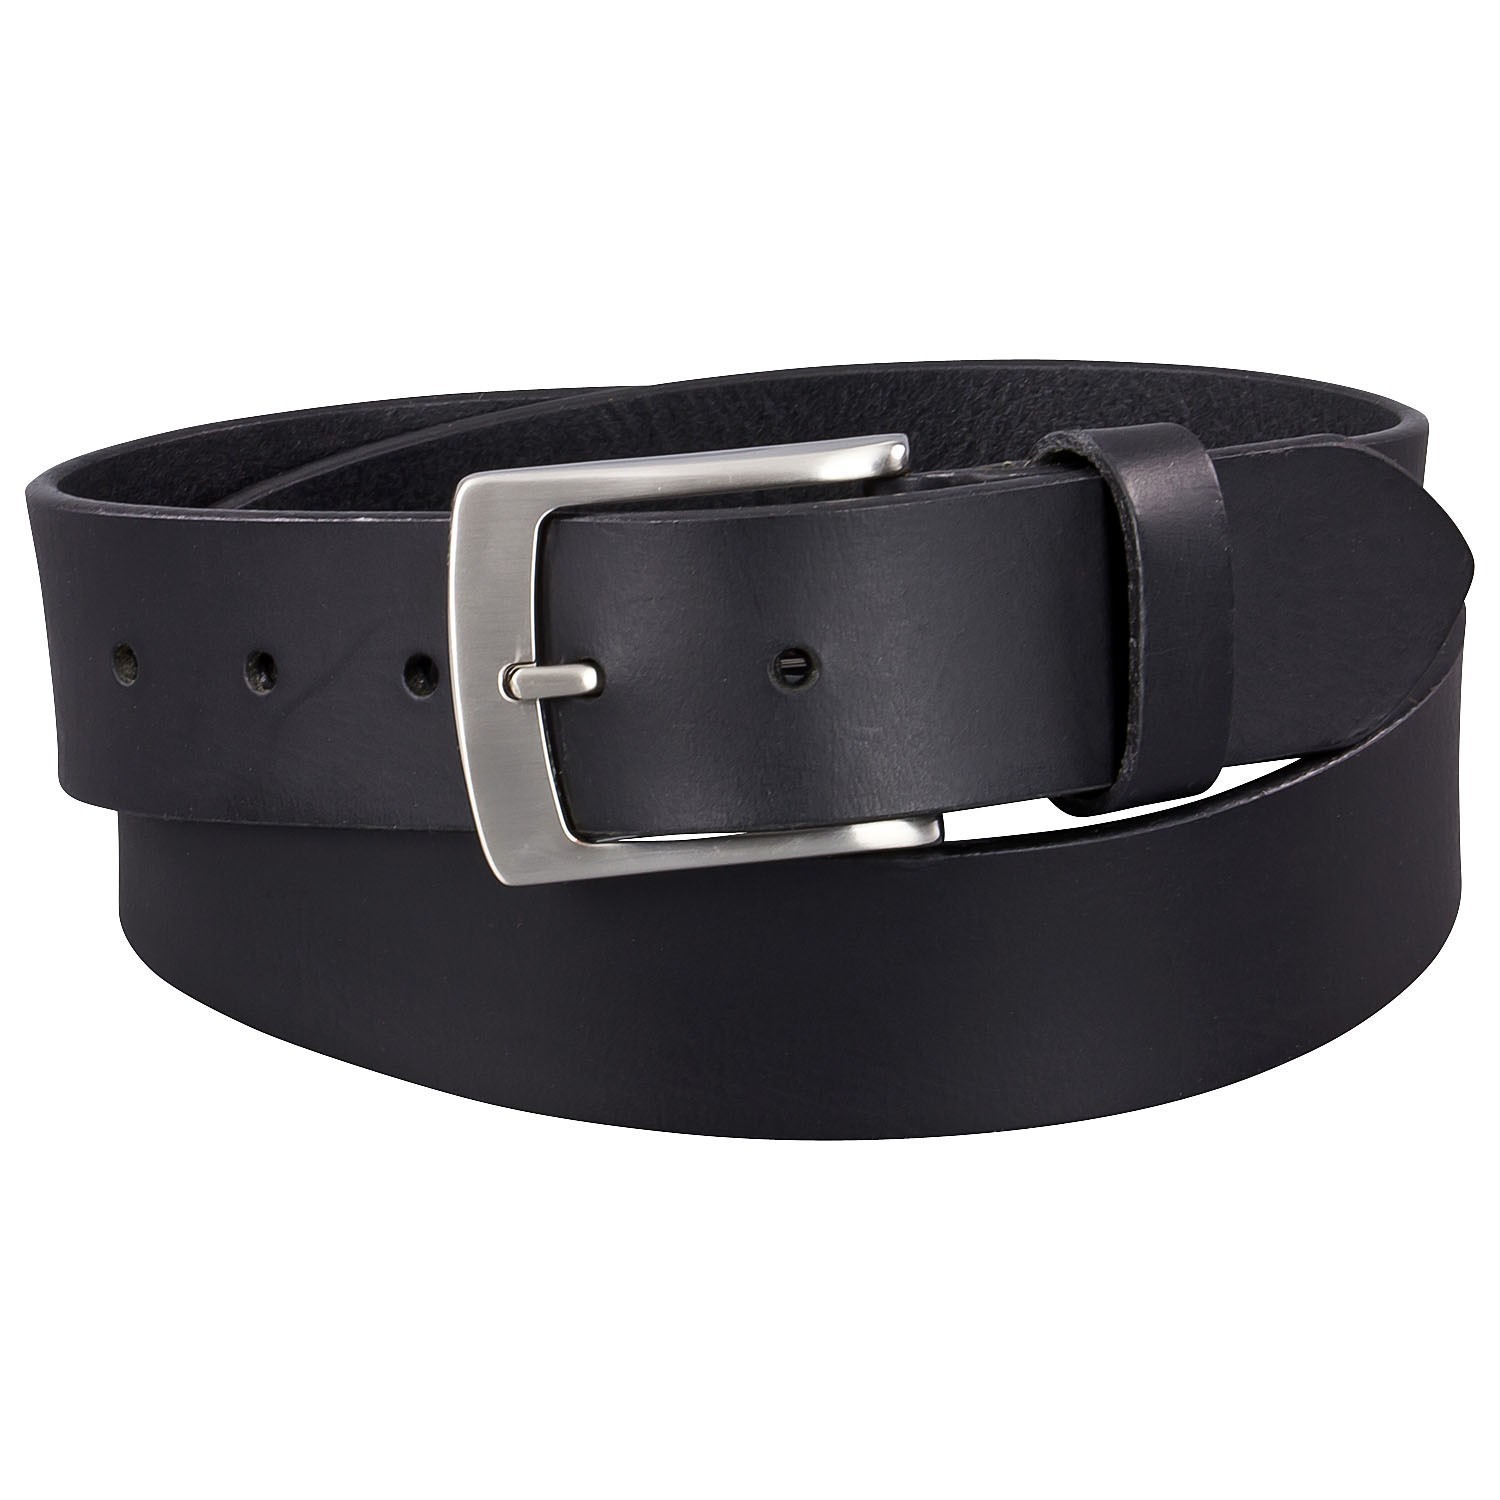 Black basic jeans belt up to over length 170 cm (66.9 inches) by Lindenmann